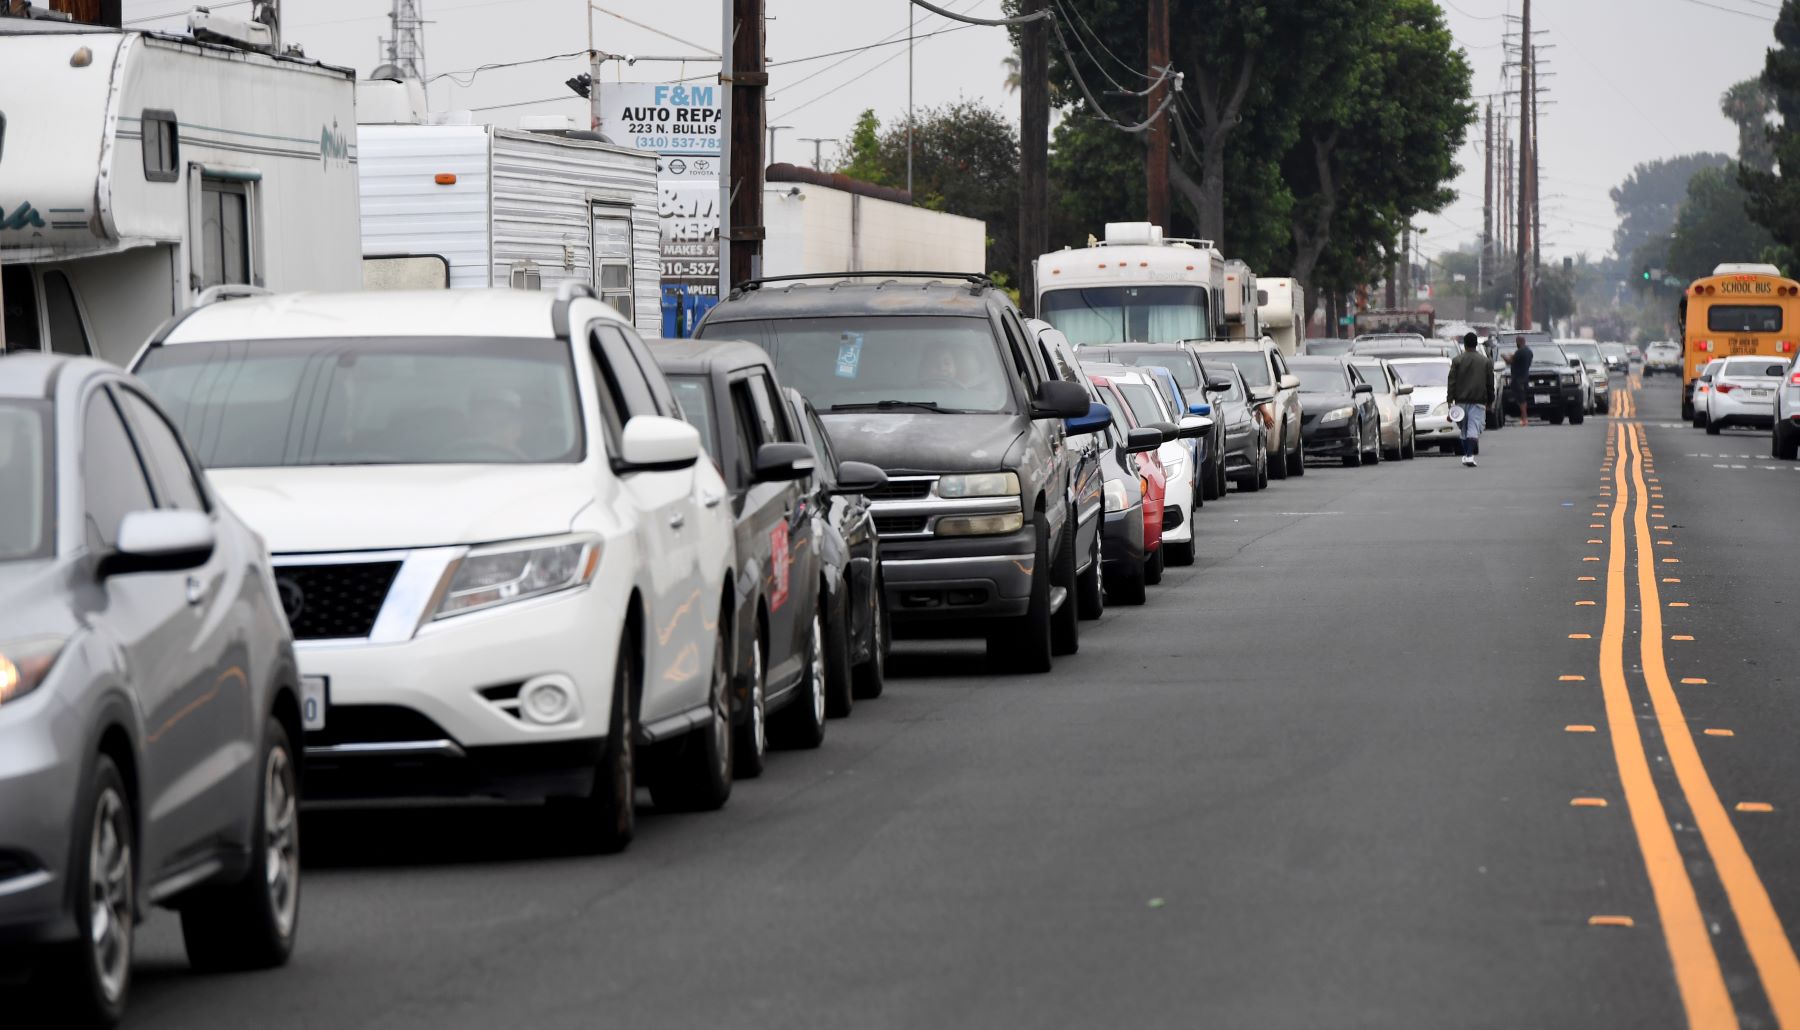 Cars lining up at the ZY Oil gas station for free gas in Compton, California